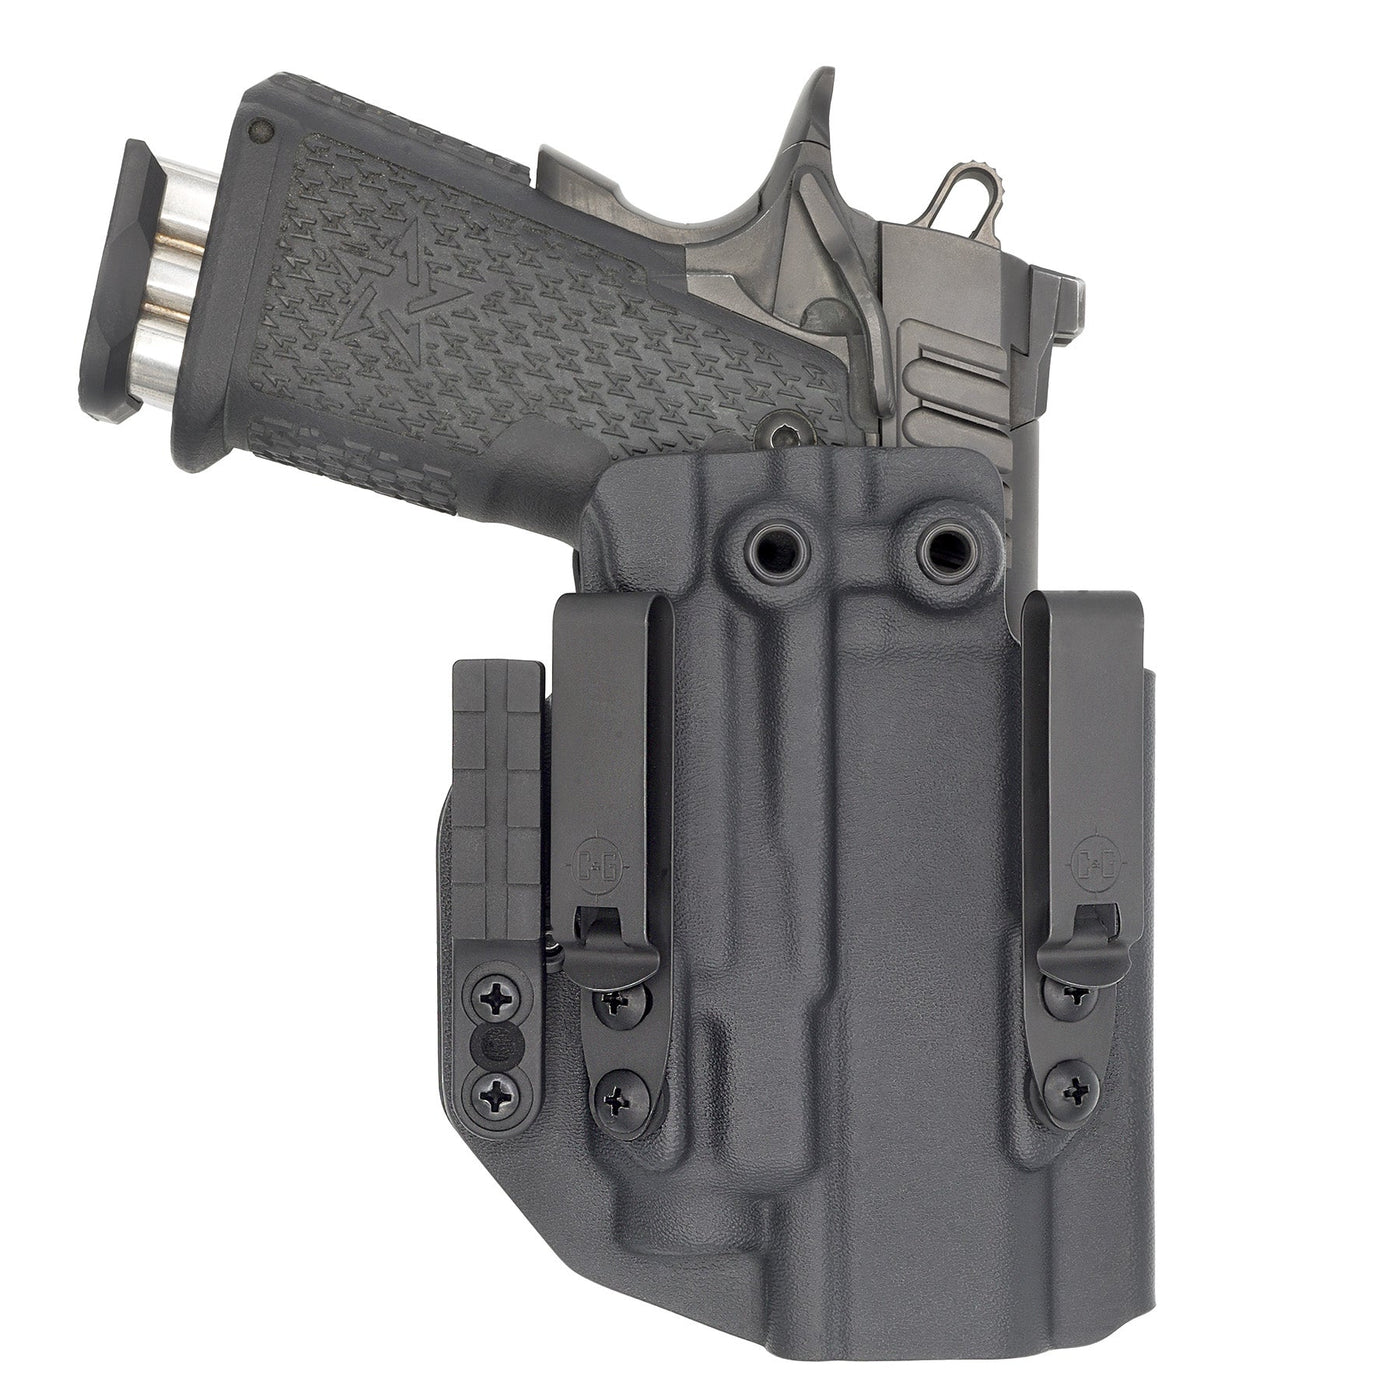 C&G Holsters custom IWB ALPHA UPGRADE Tactical 1911 DS Prodigy Streamlight TLR7/a in holstered position